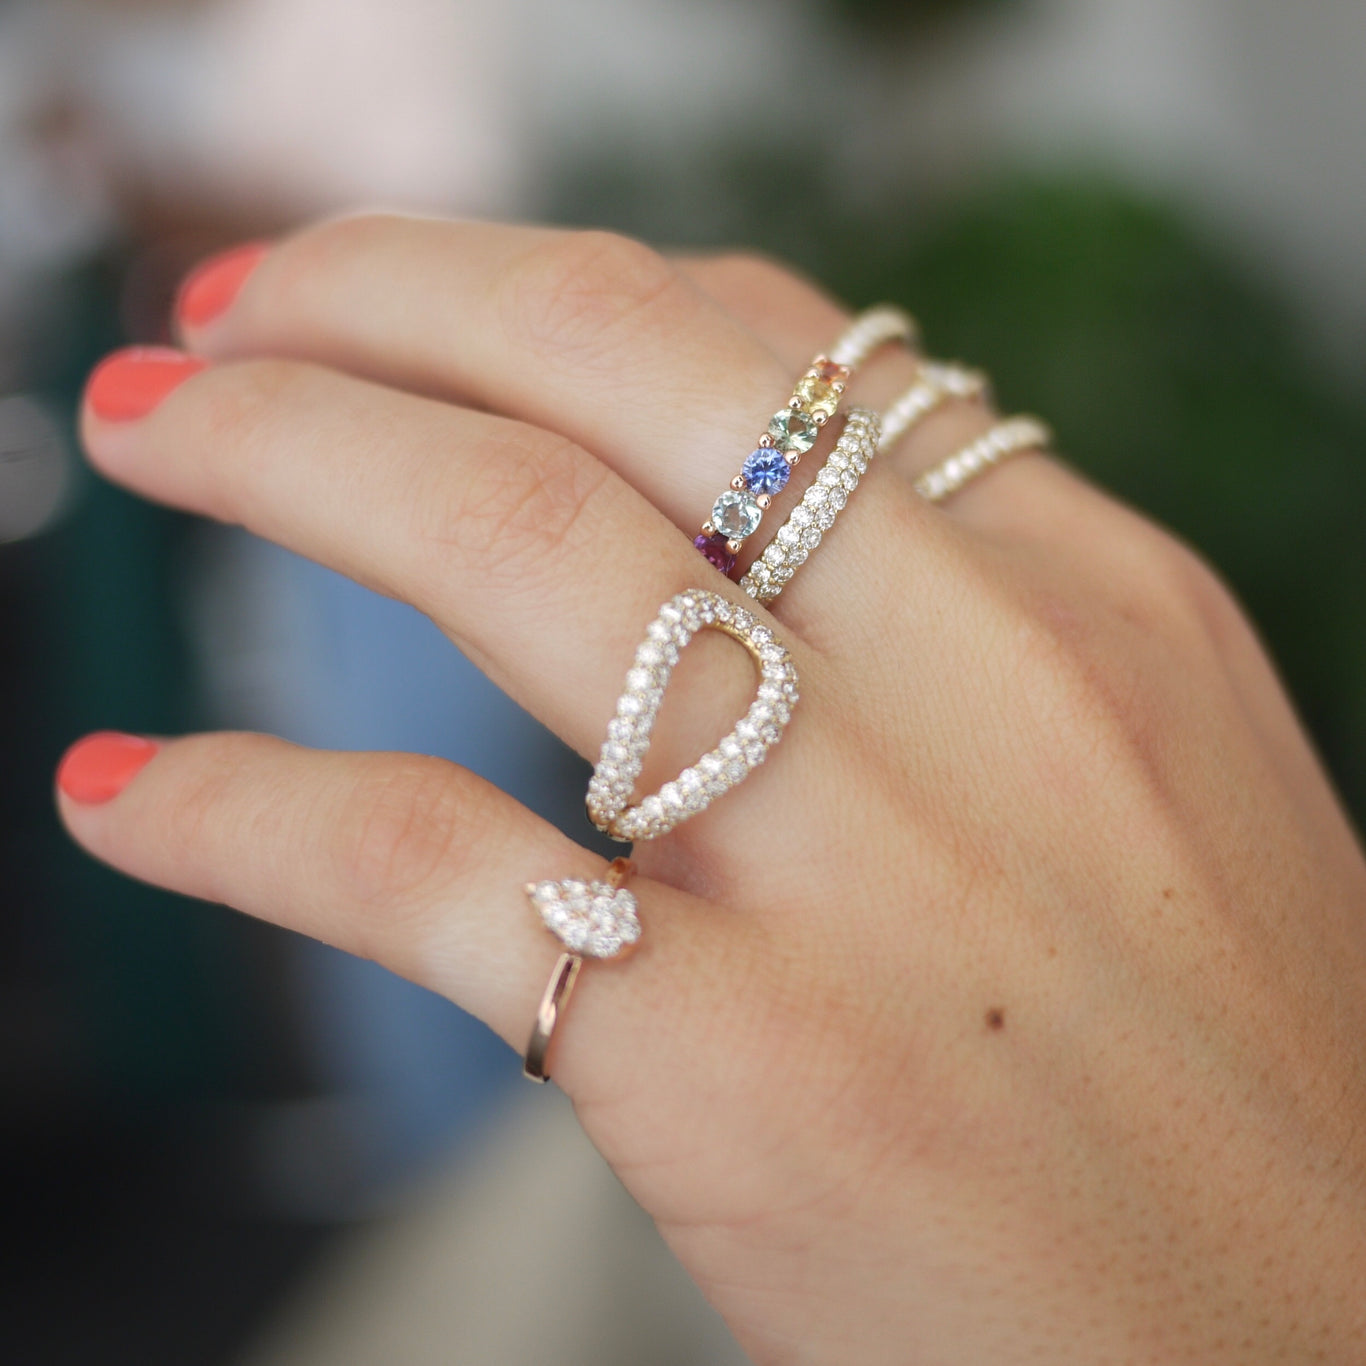 Athena Ring shown layered underneath the Rainbow Eternity Band.